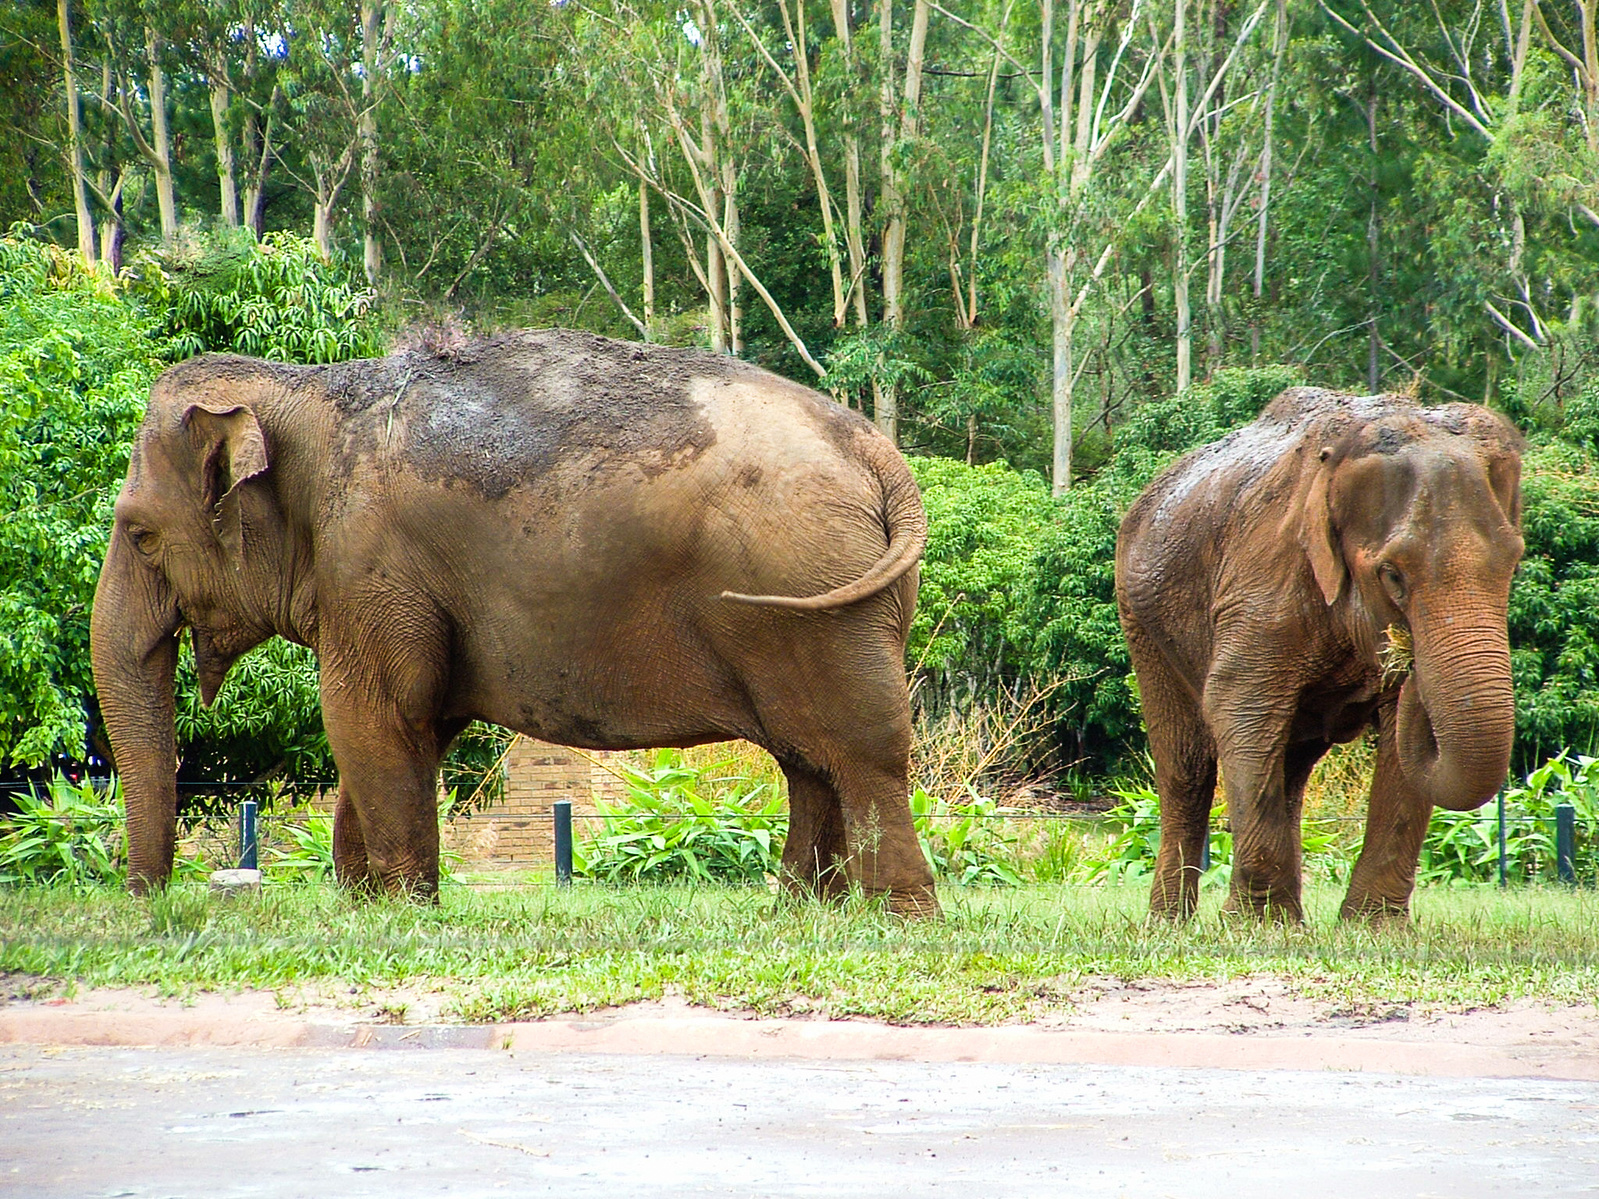 Two elephants with tails swaying standing in front of a green forest. Photo taken by planetdesigns.net